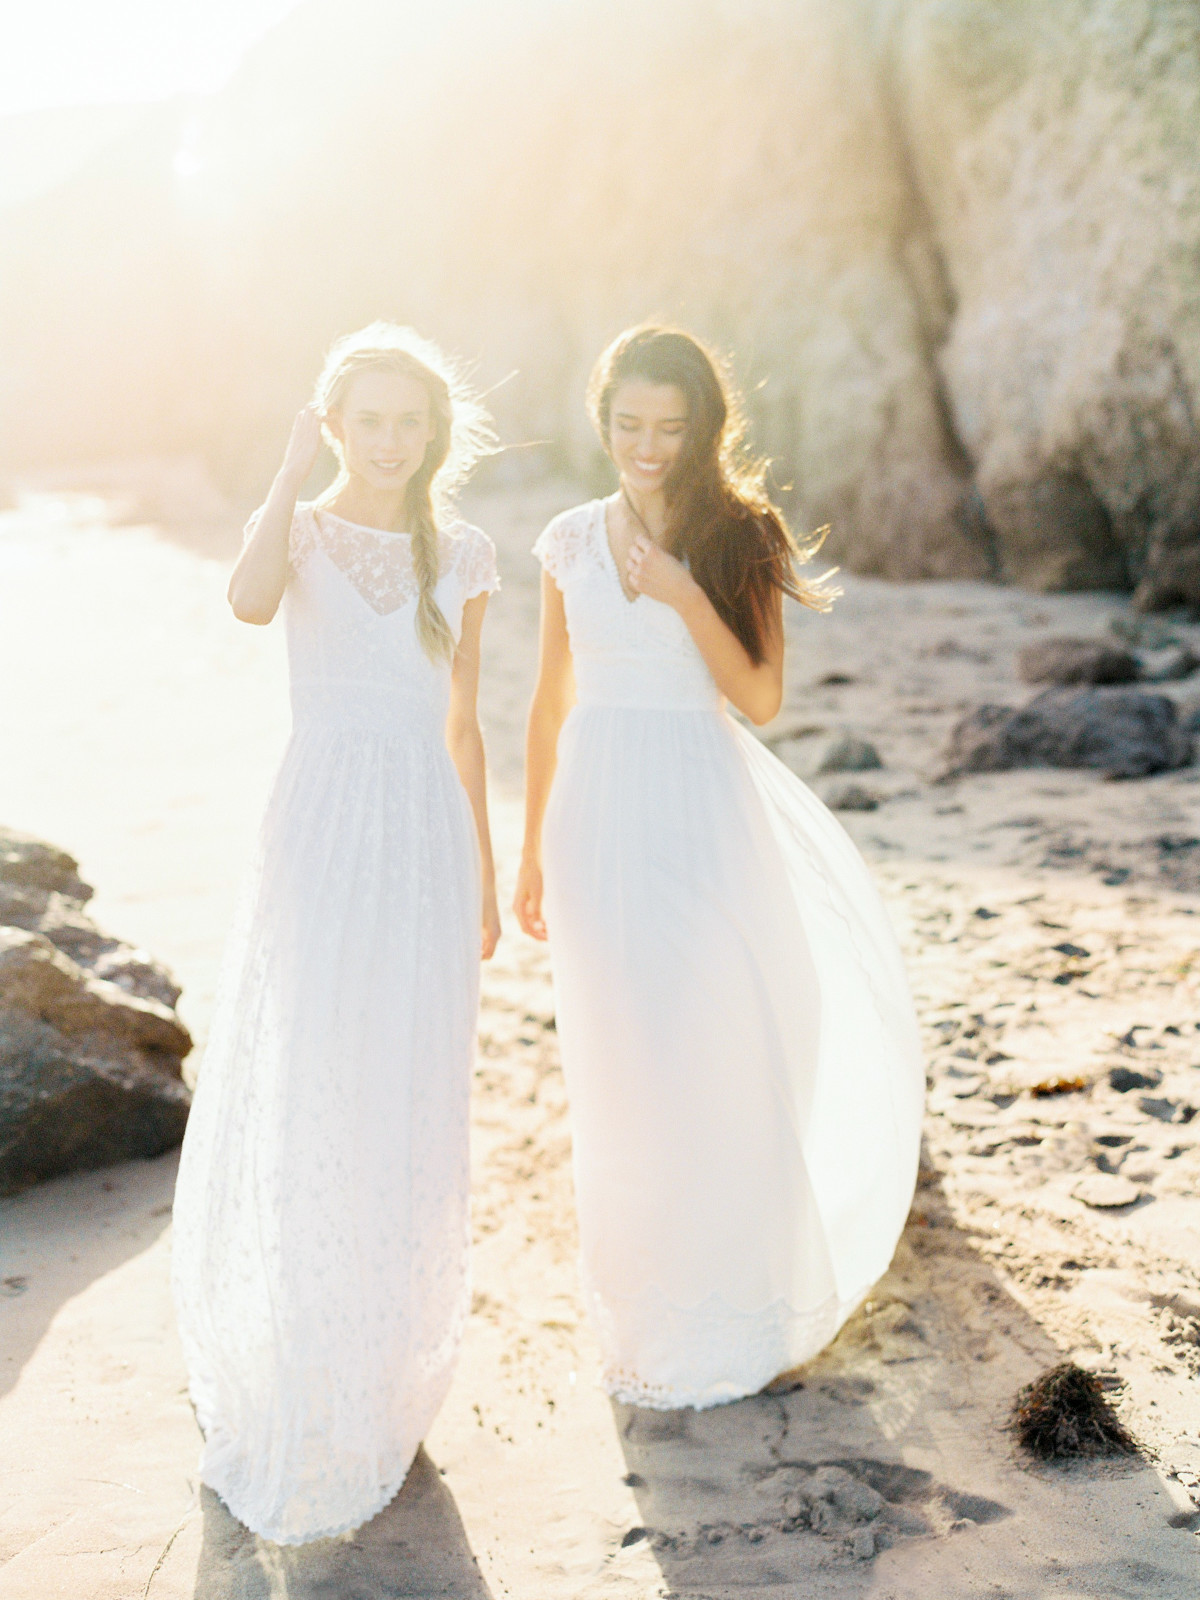 Rhapsody Collection – For the Boho bride